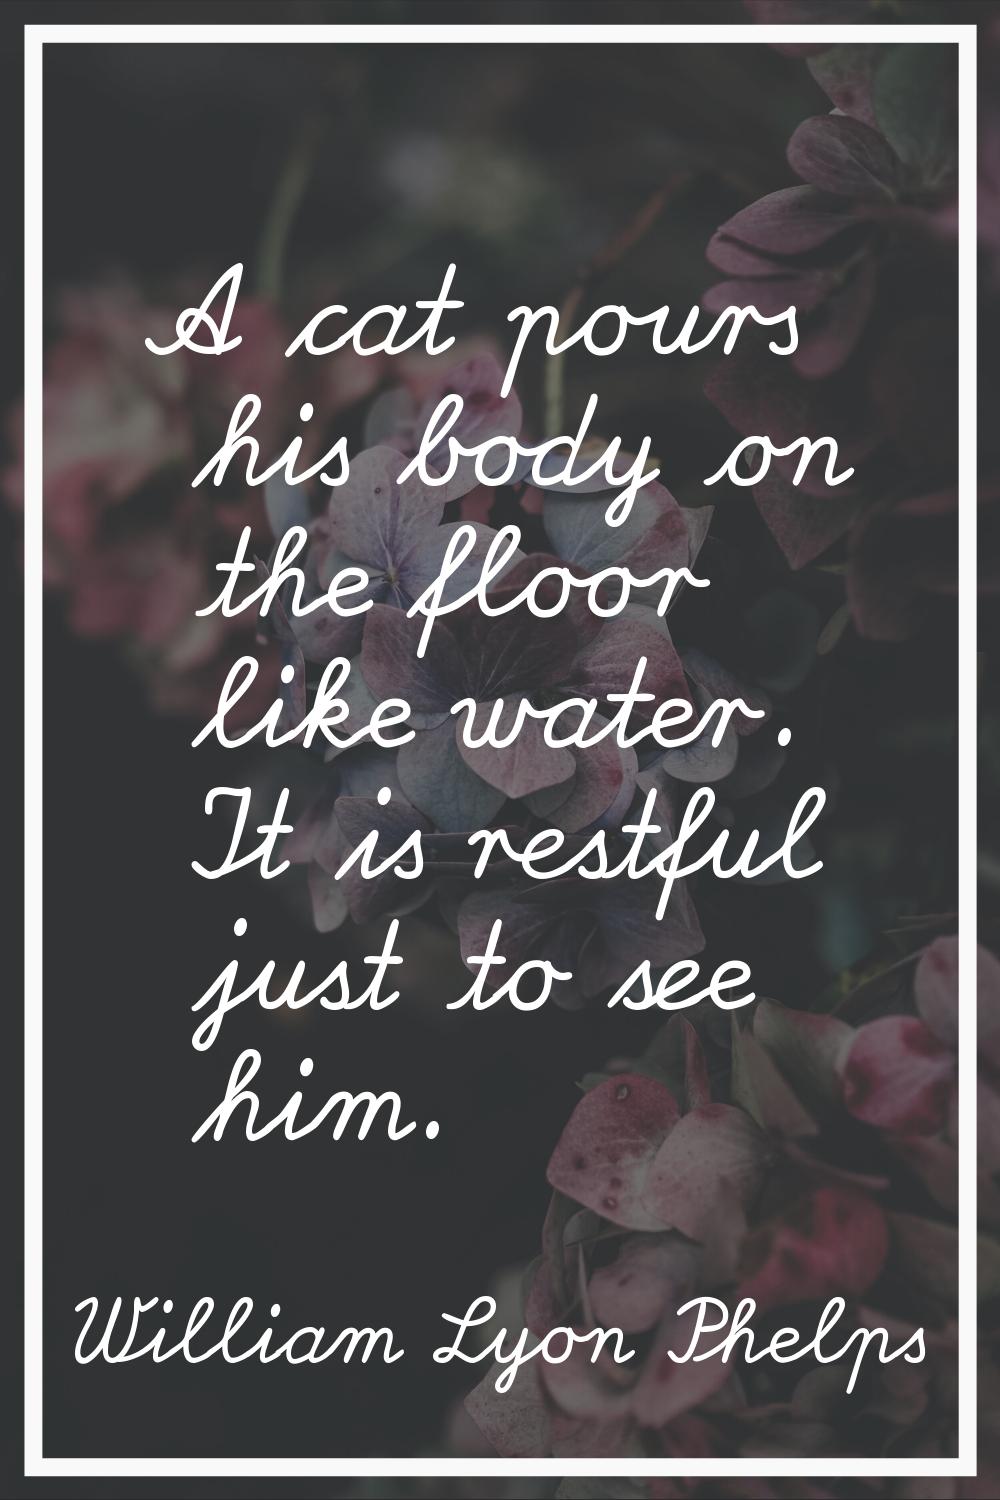 A cat pours his body on the floor like water. It is restful just to see him.